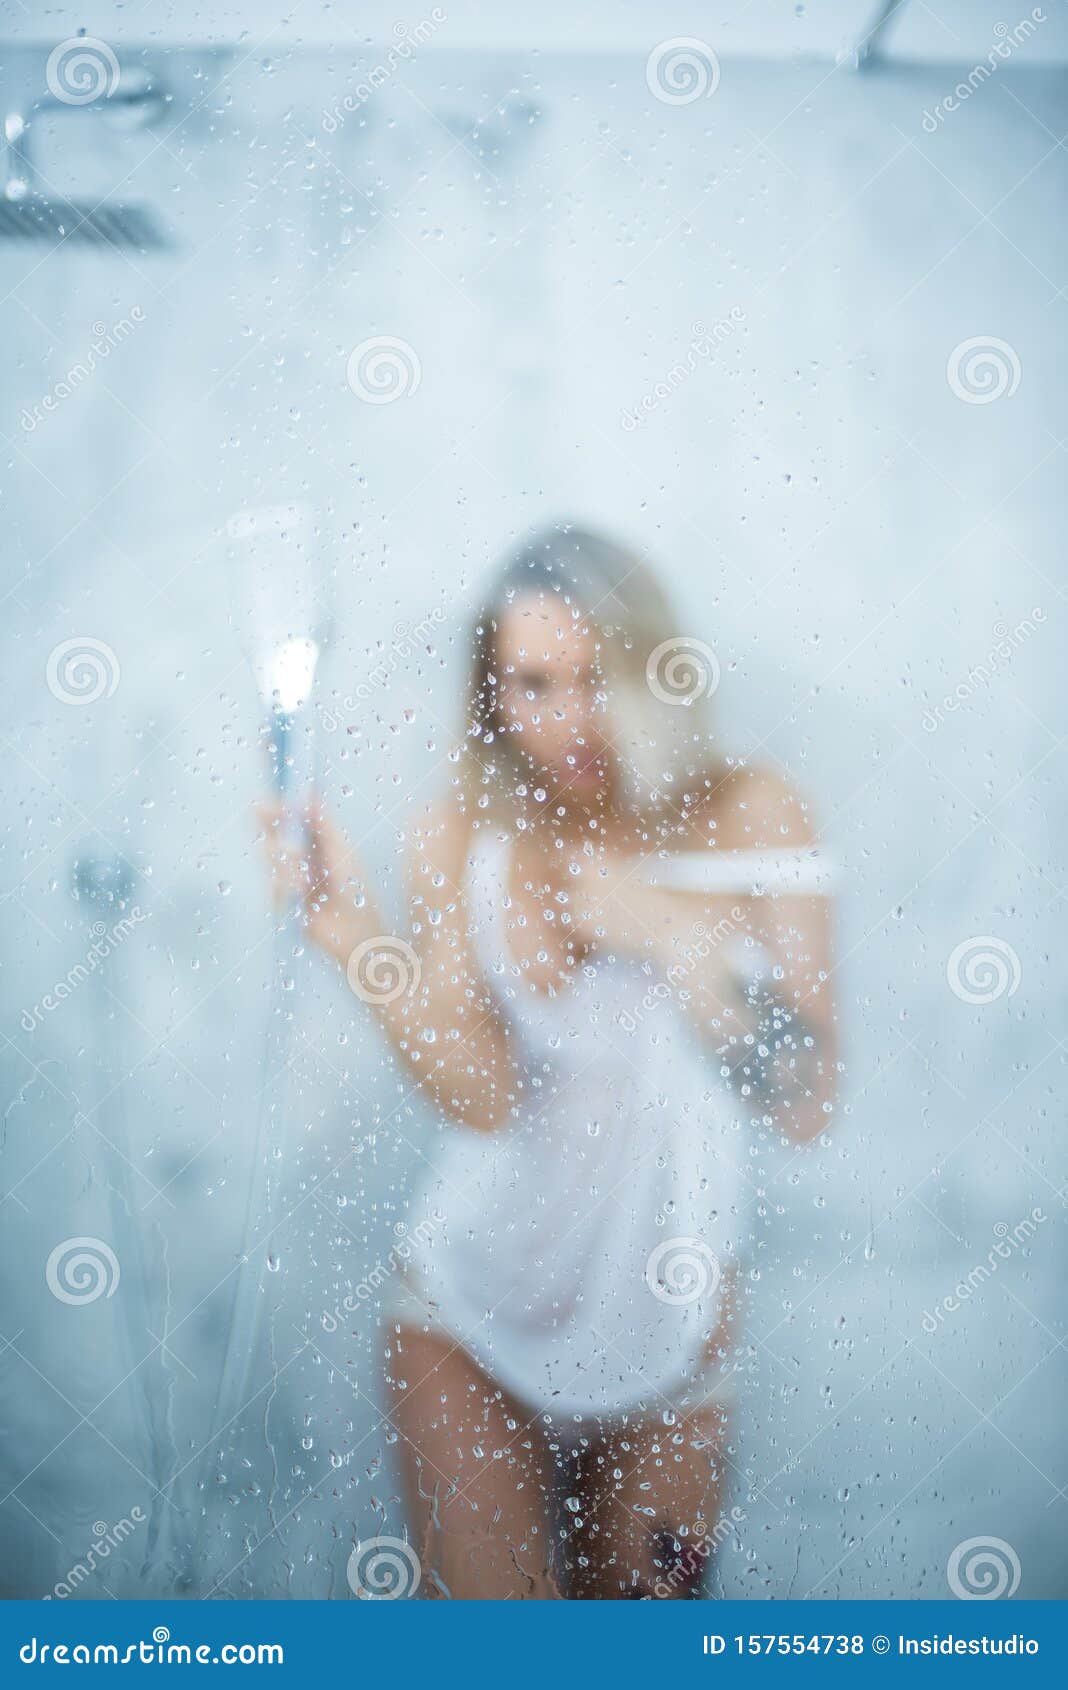 A Slender Girl In A White Wet T Shirt Takes A Shower Pours Water